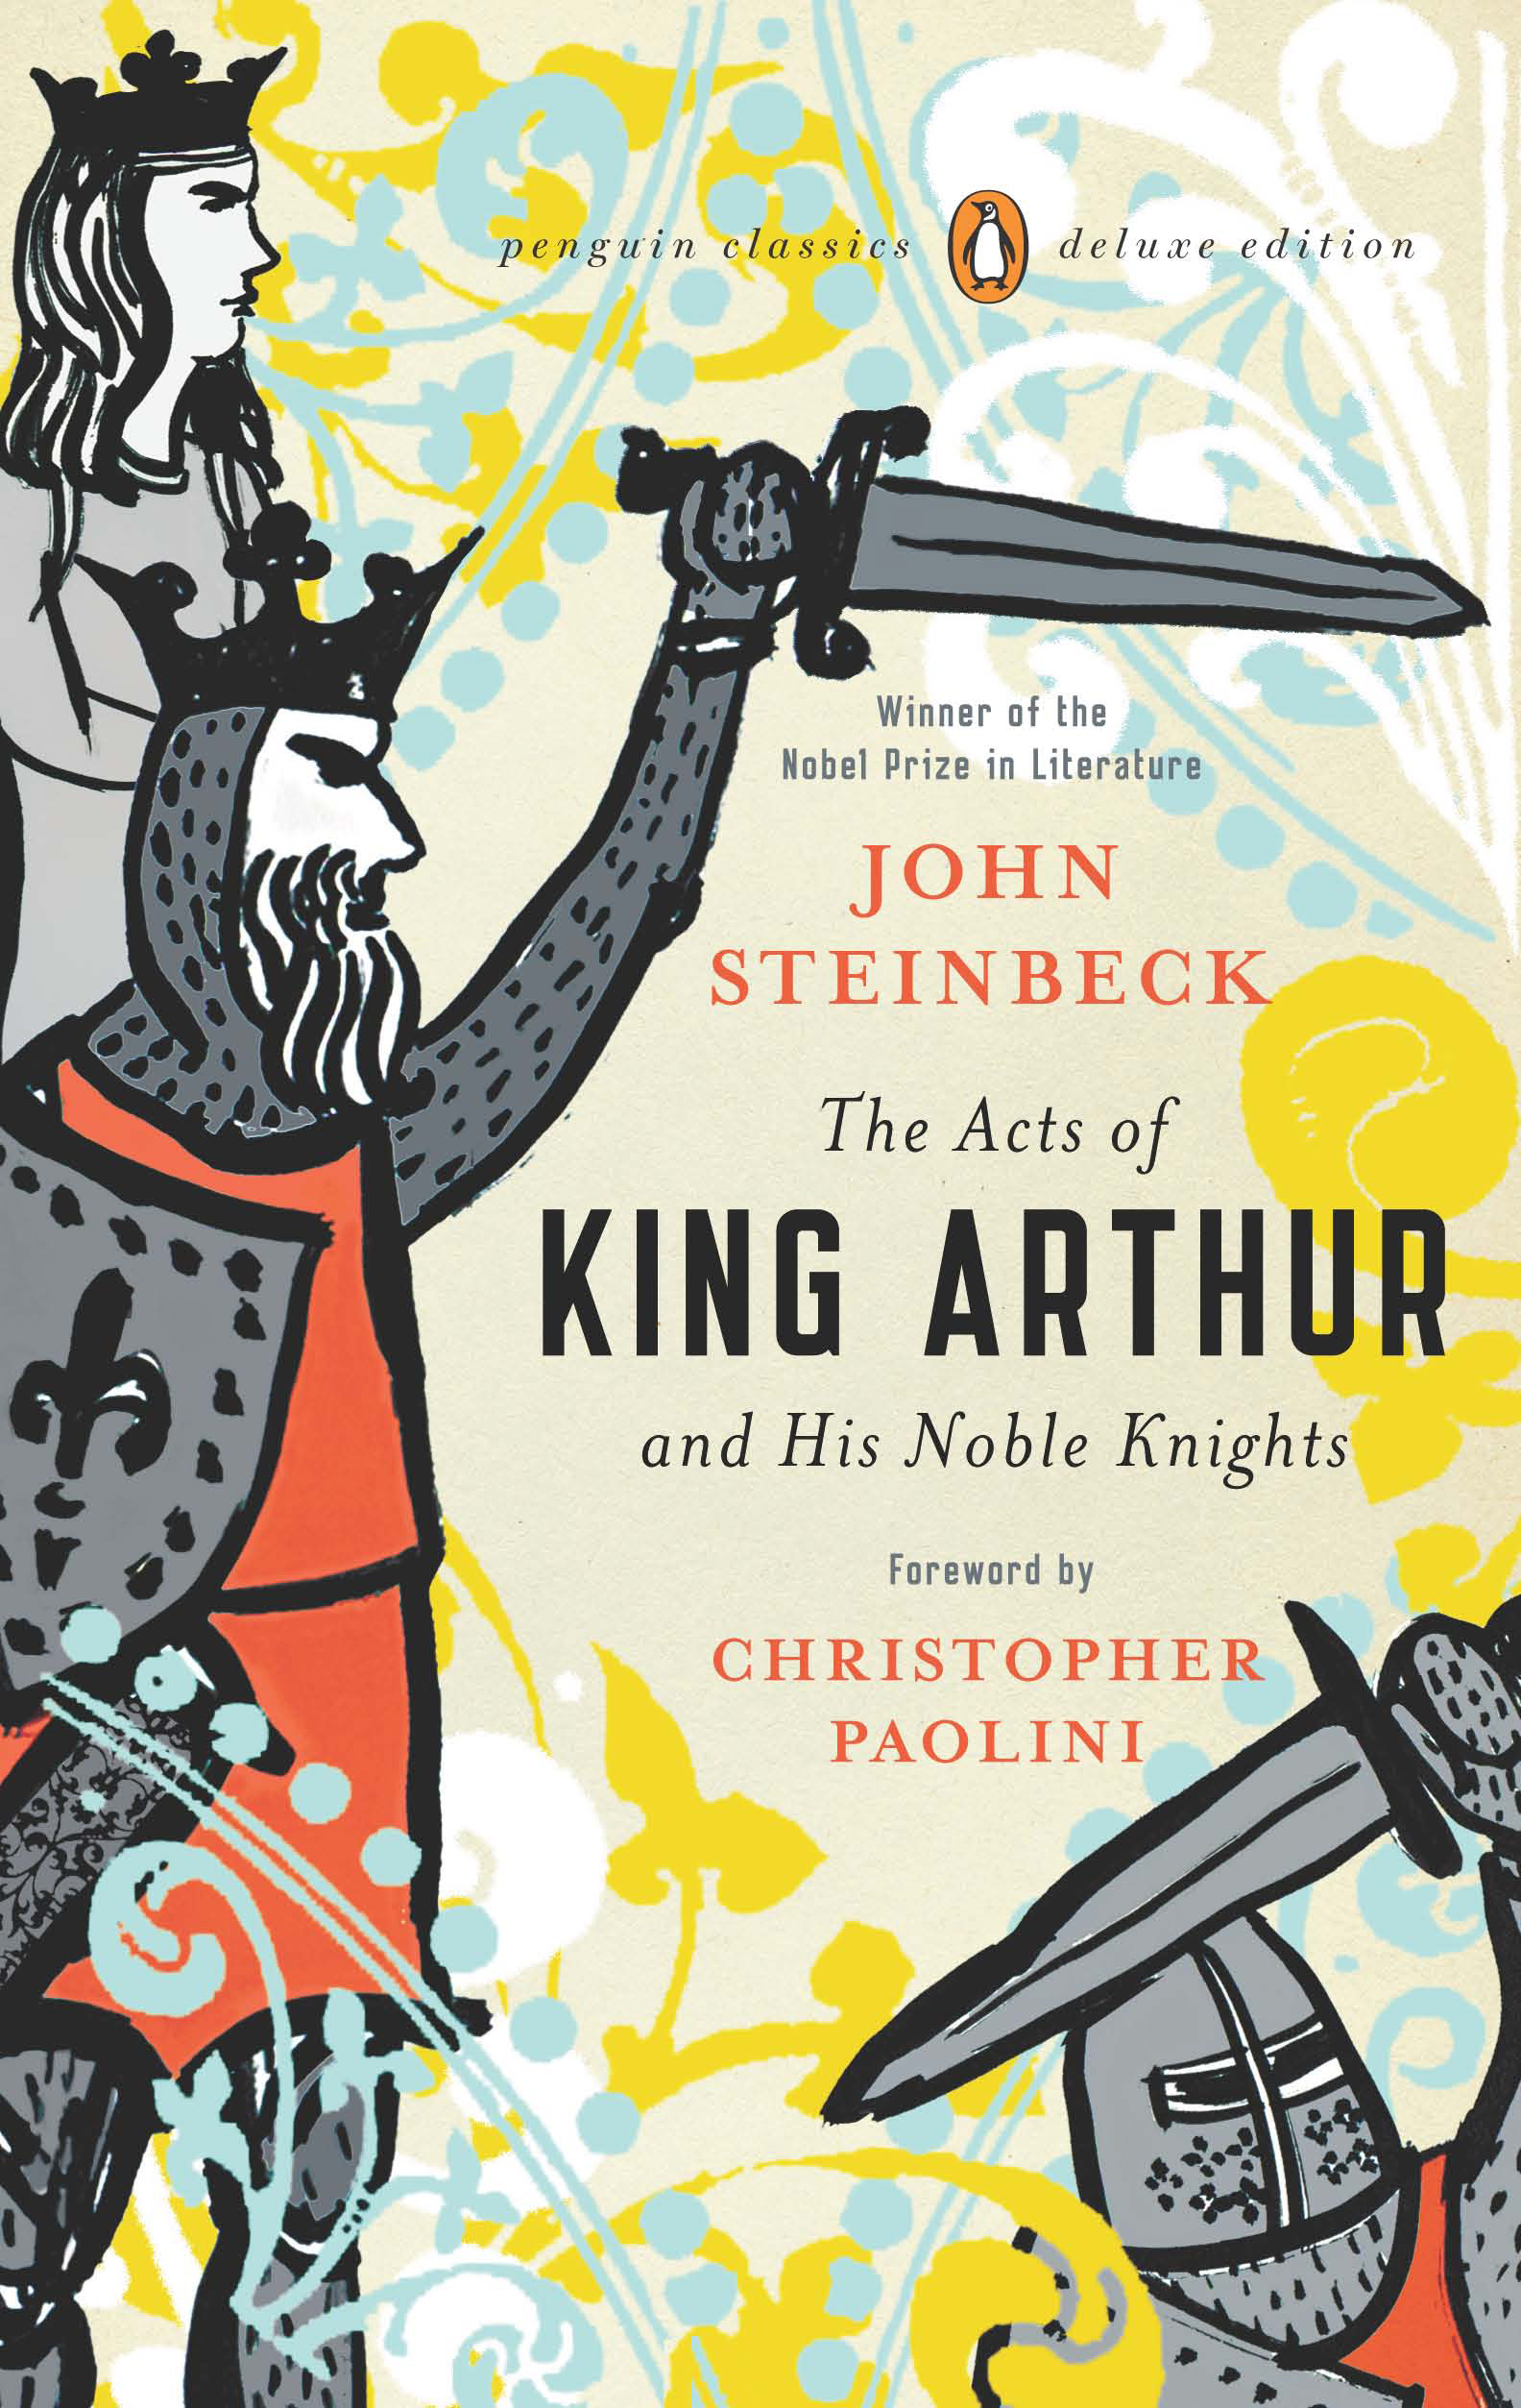 The Acts of King Arthur and His Noble Knights, other